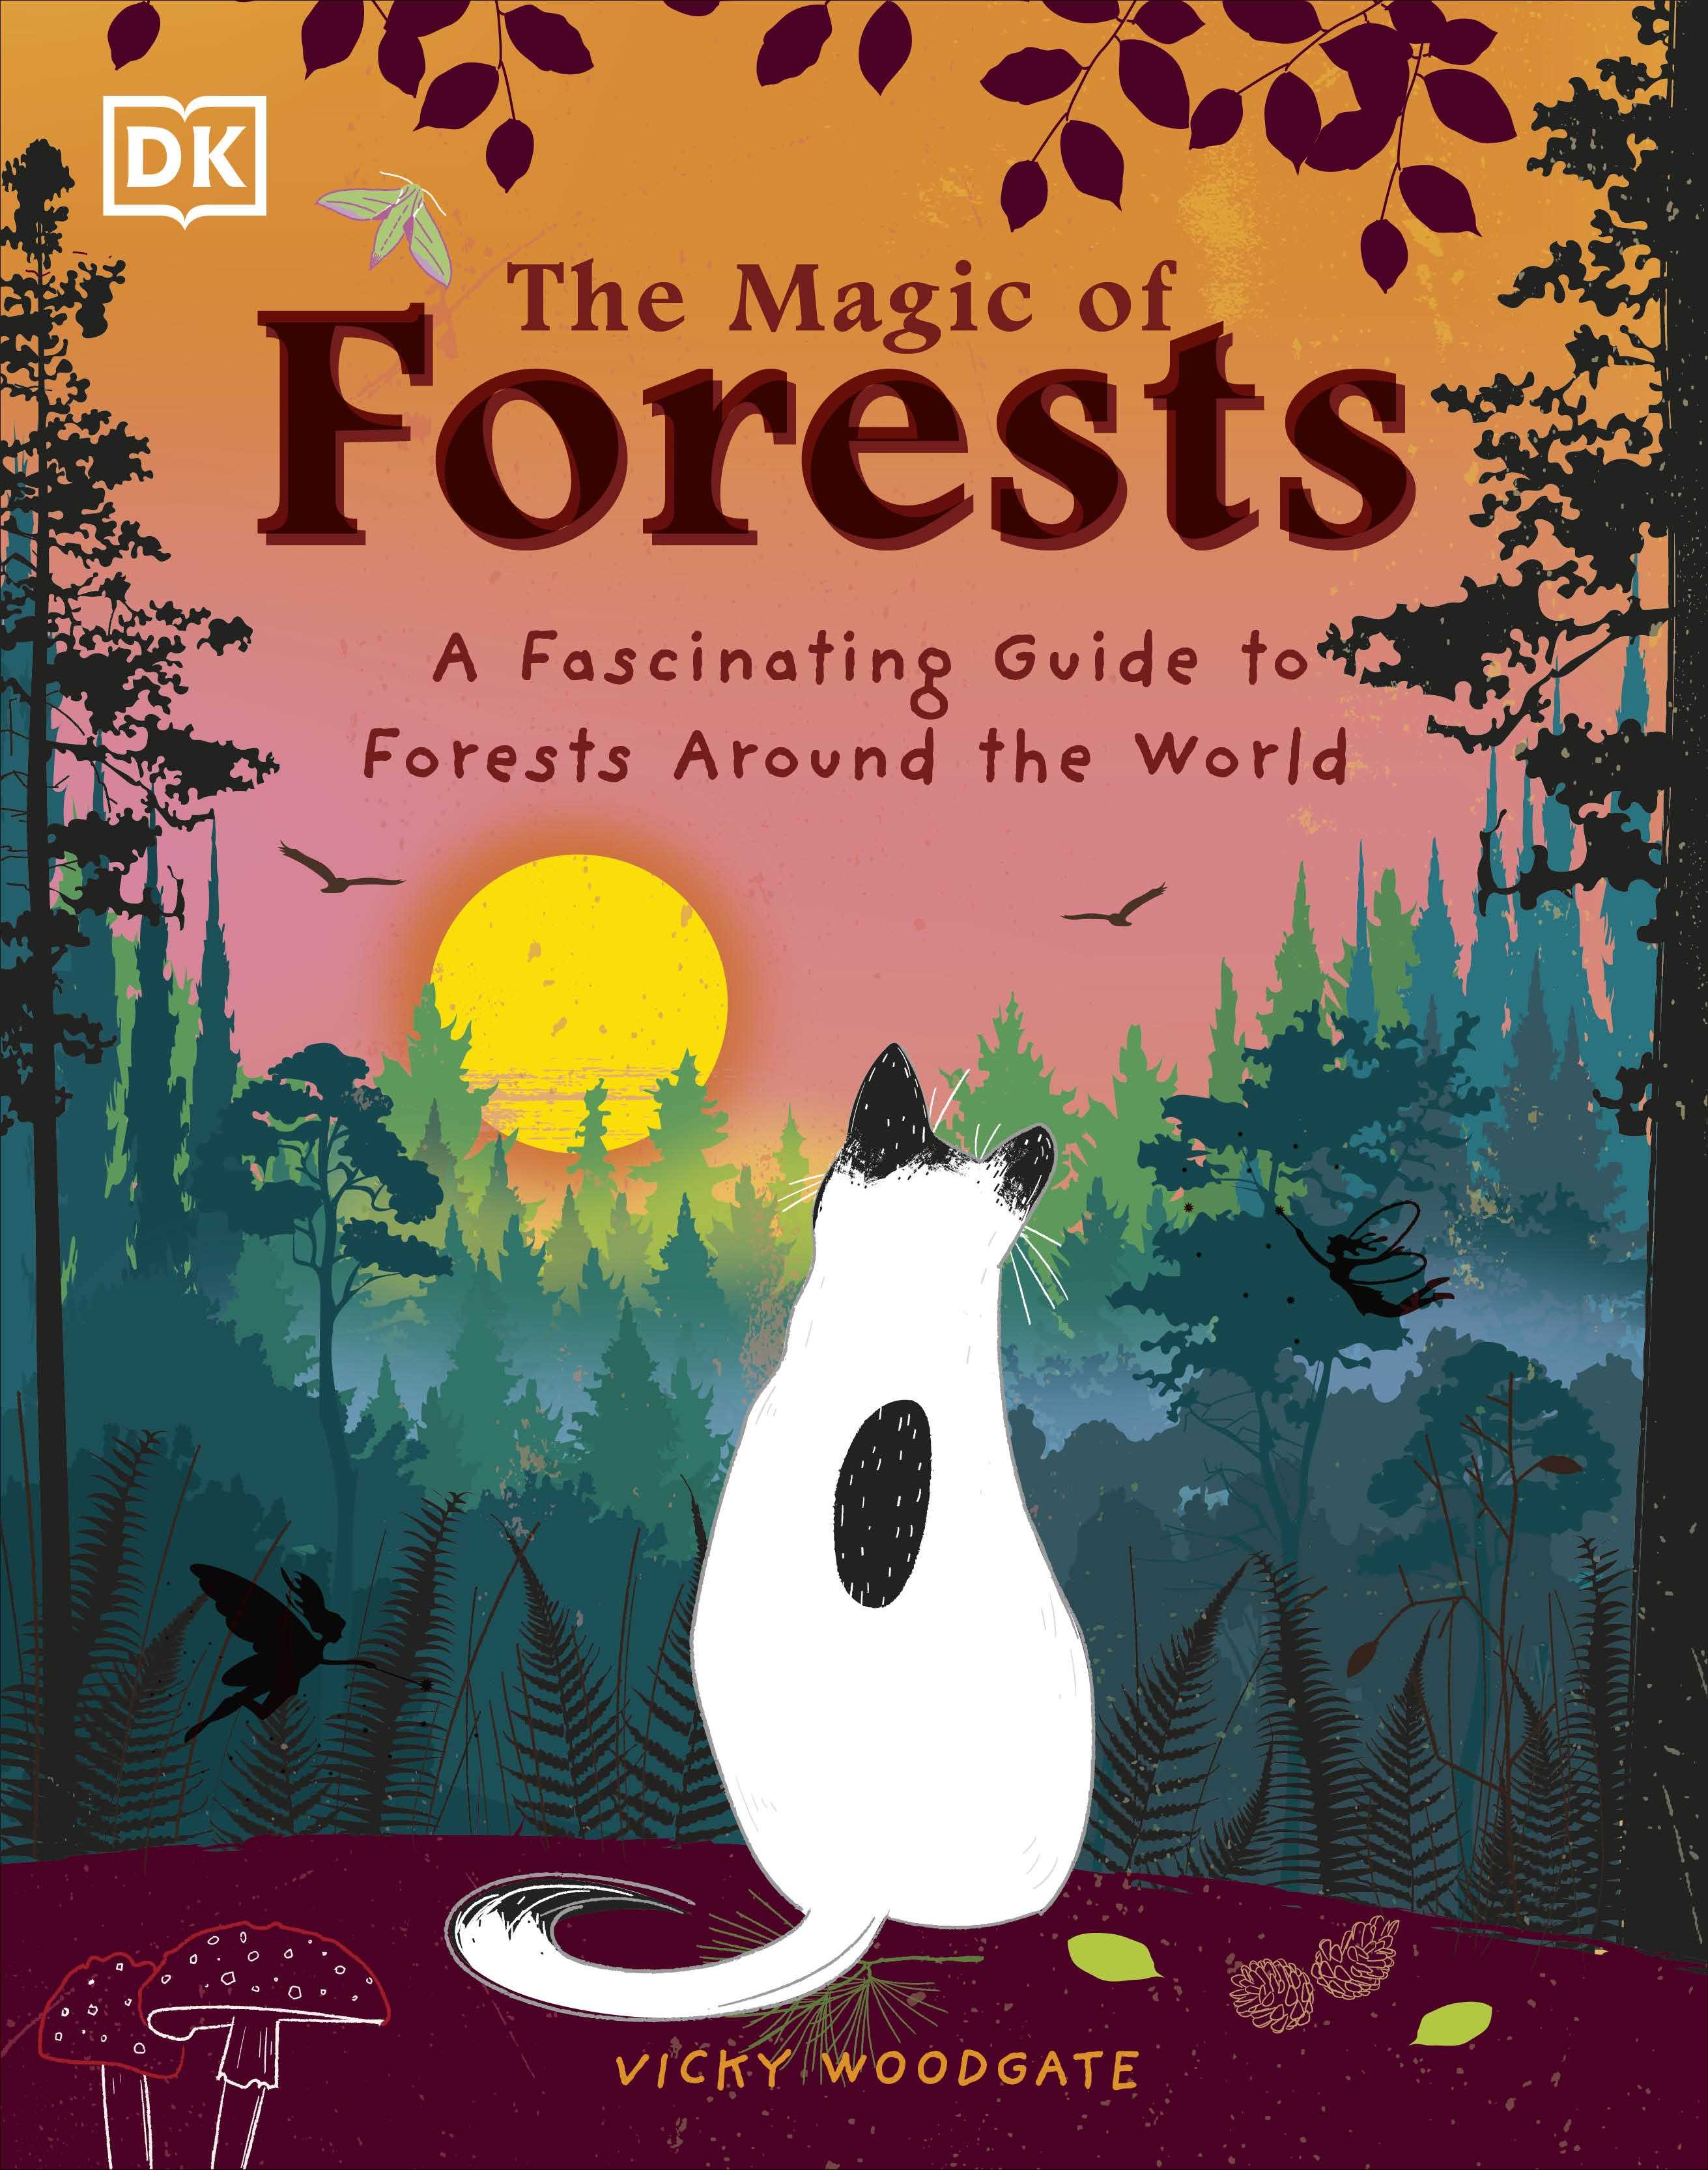 The Magic of Forests